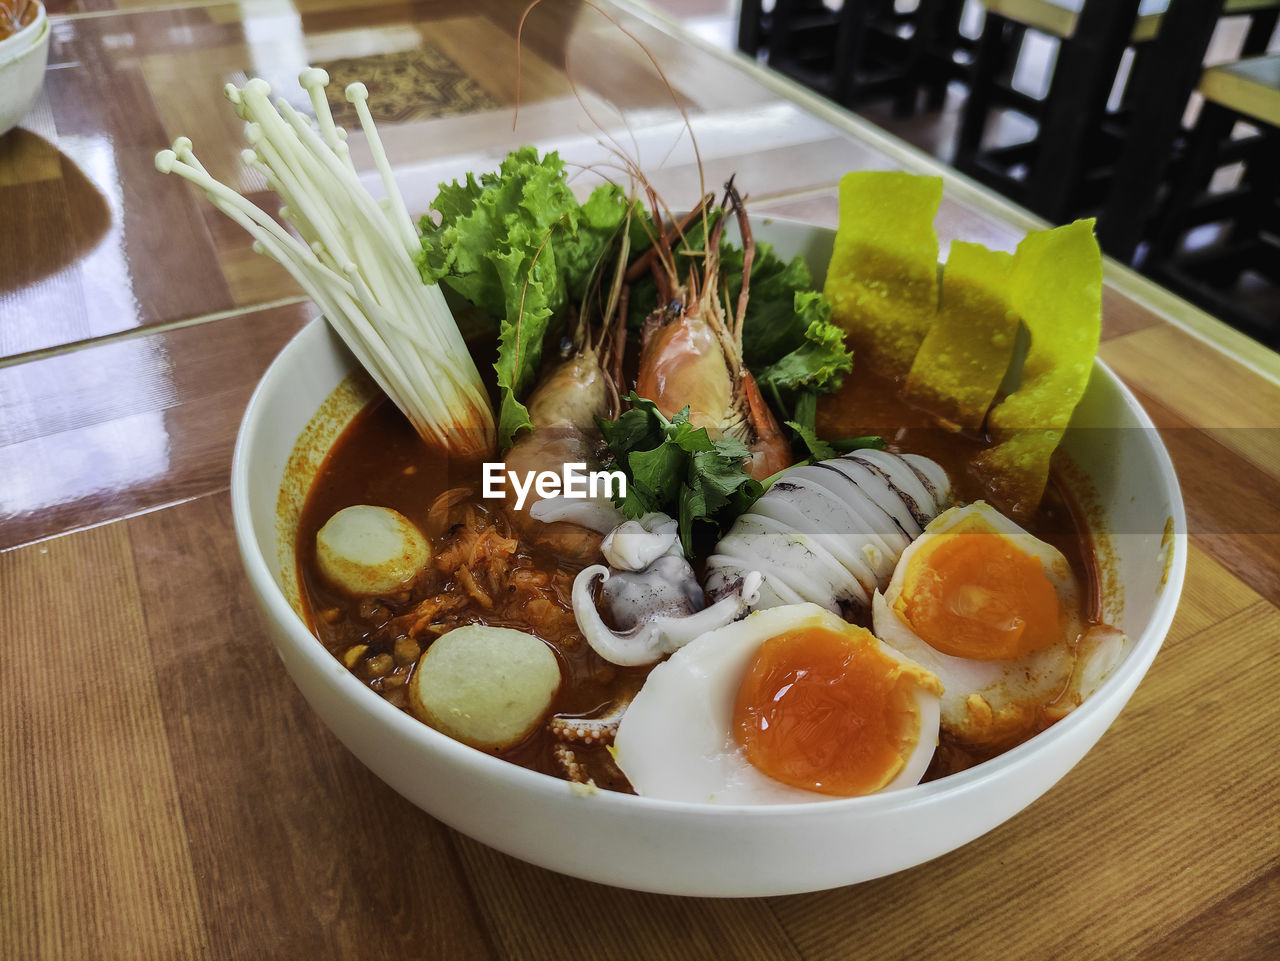 food and drink, food, healthy eating, wellbeing, meal, table, freshness, vegetable, bowl, asian food, dish, indoors, cuisine, japanese food, no people, high angle view, lunch, egg, culture, soup, restaurant, plate, serving size, close-up, wood, meat, still life